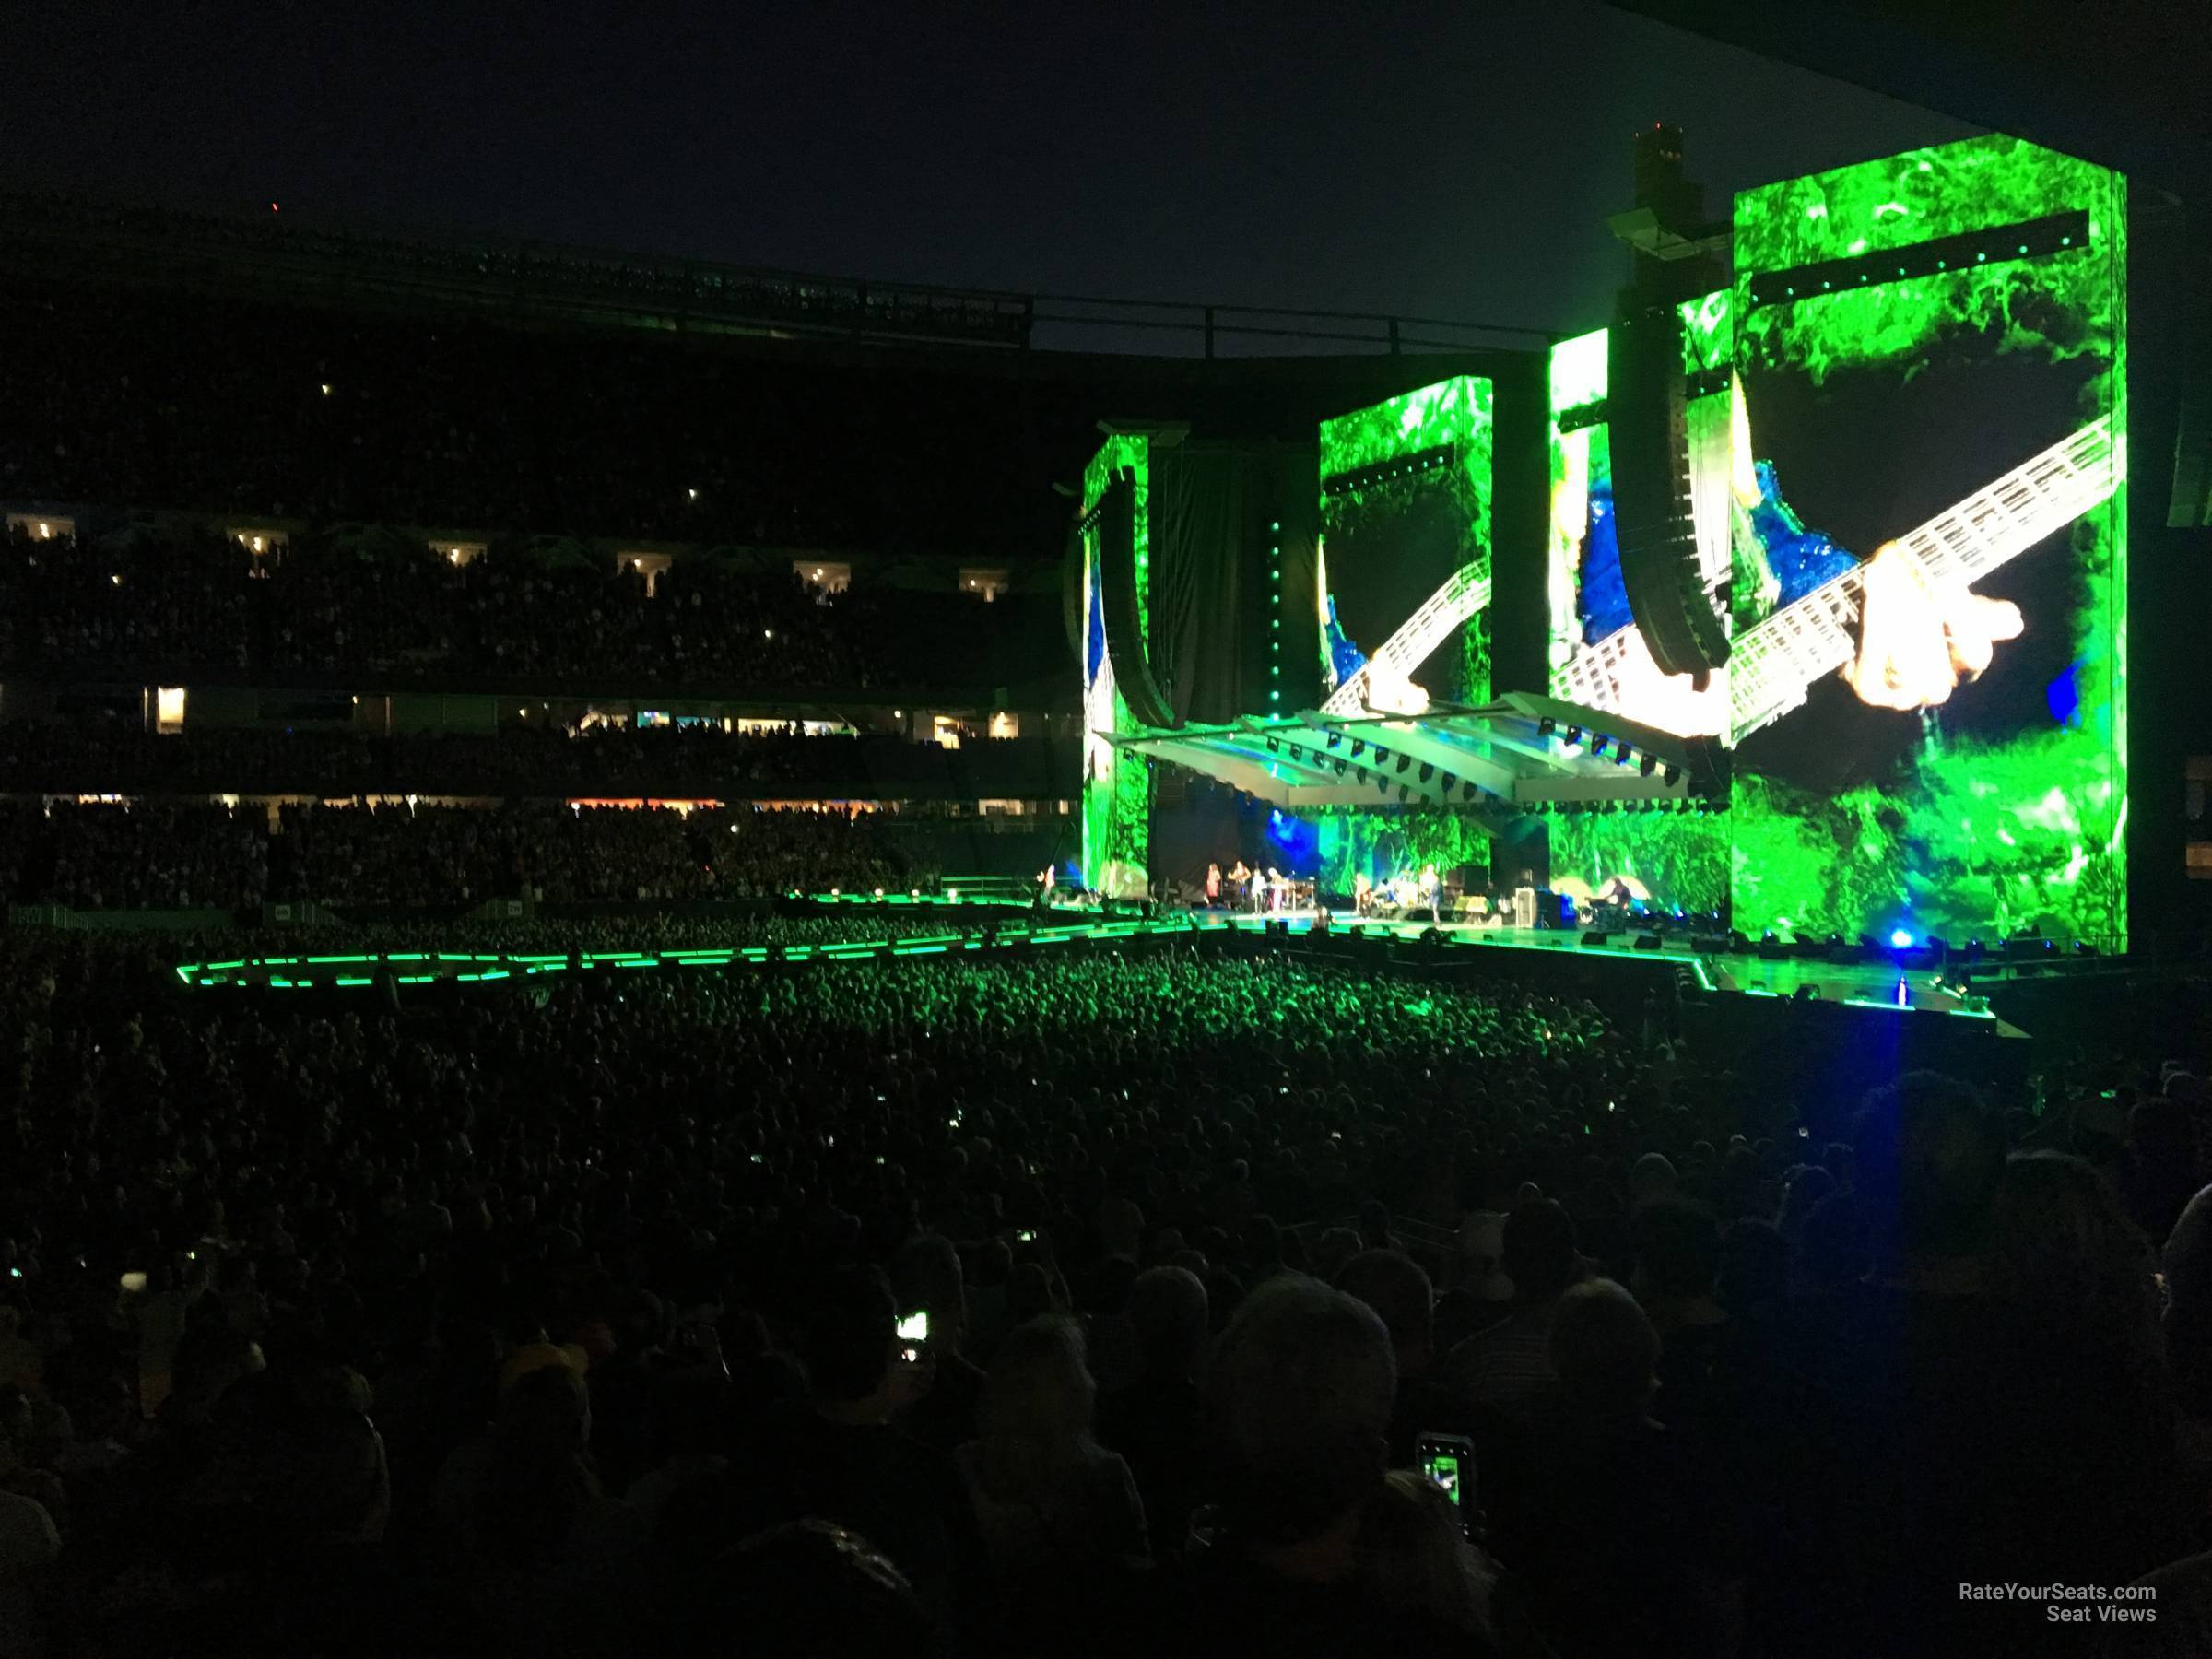 section 107, row 8 seat view  for concert - soldier field